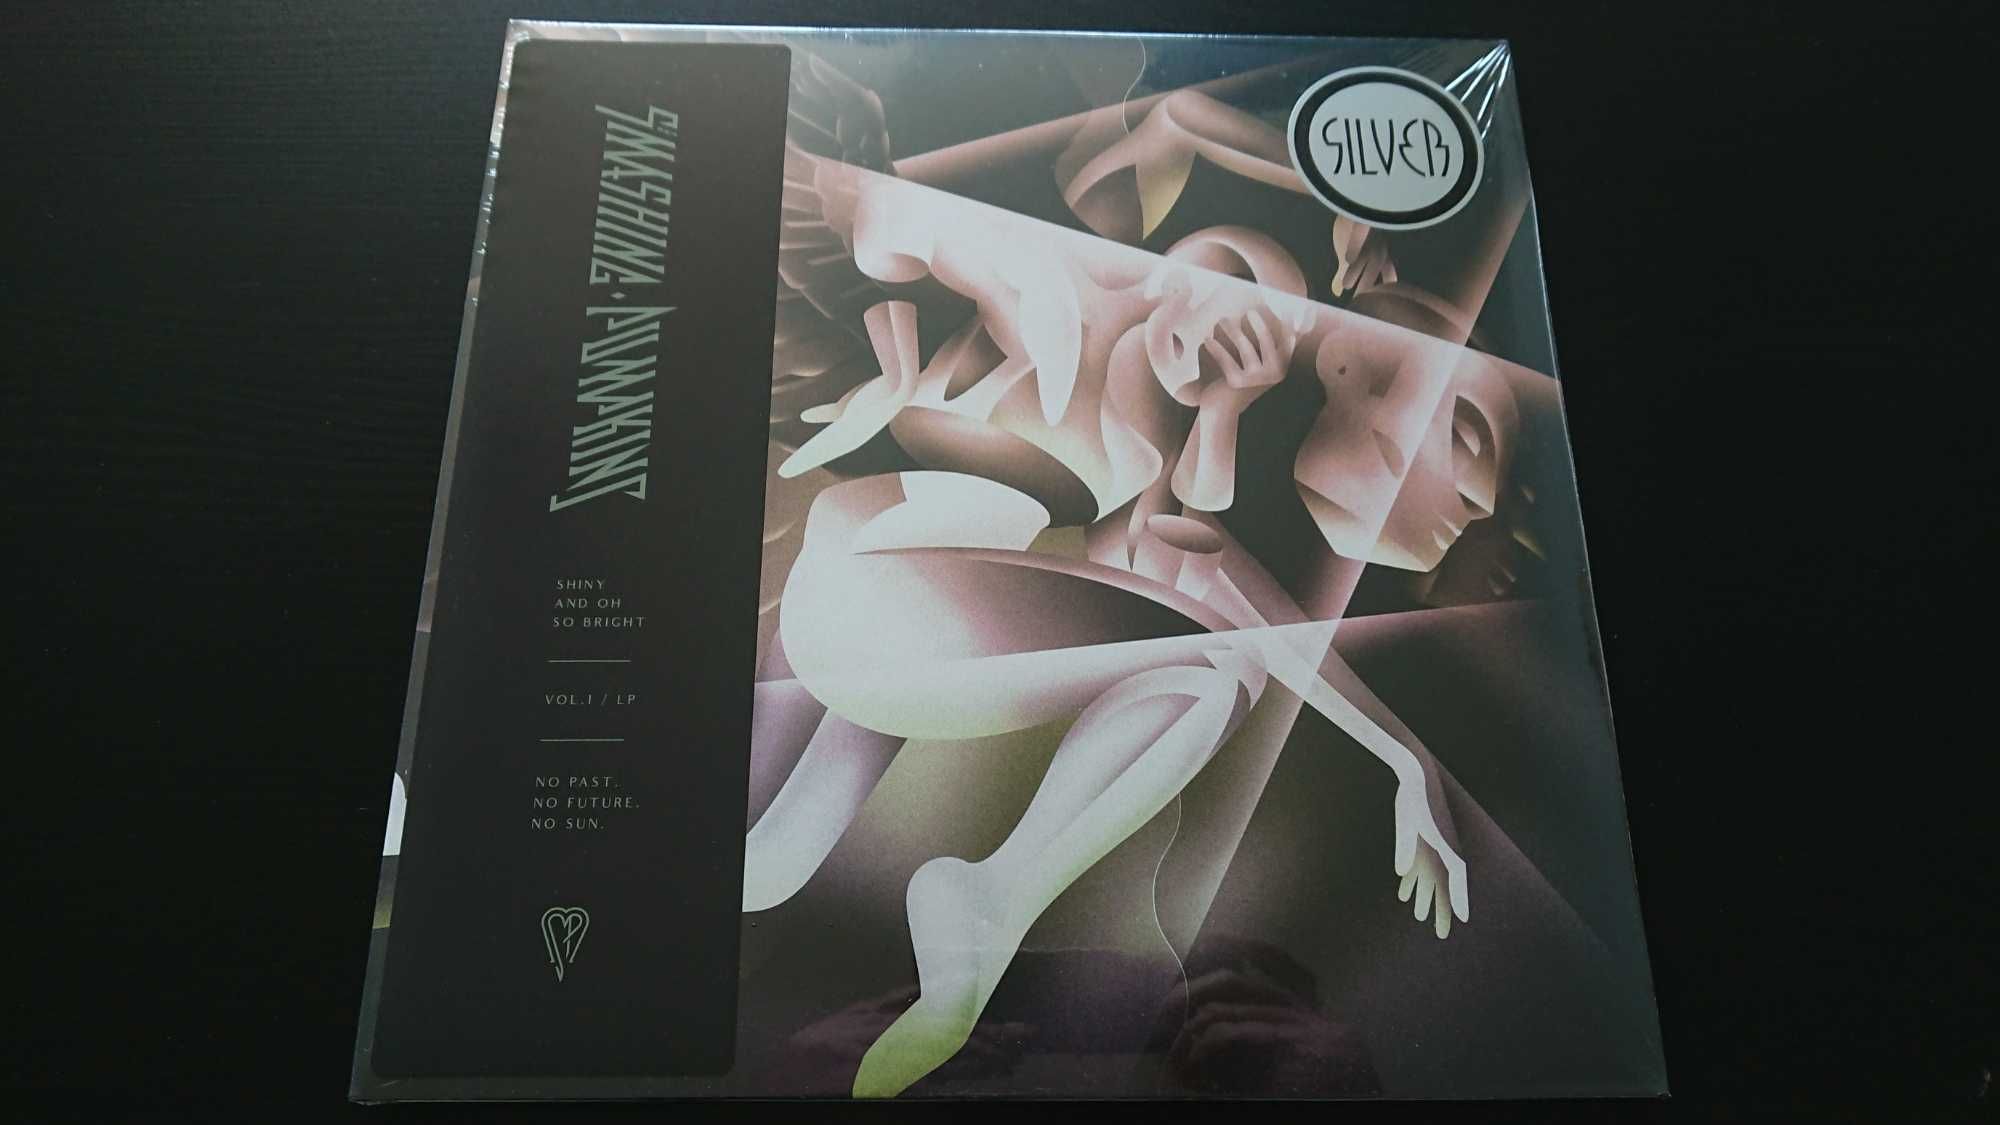 The Smashing Pumpkins Shiny And Oh So Bright *NOWA* Silver Version LP